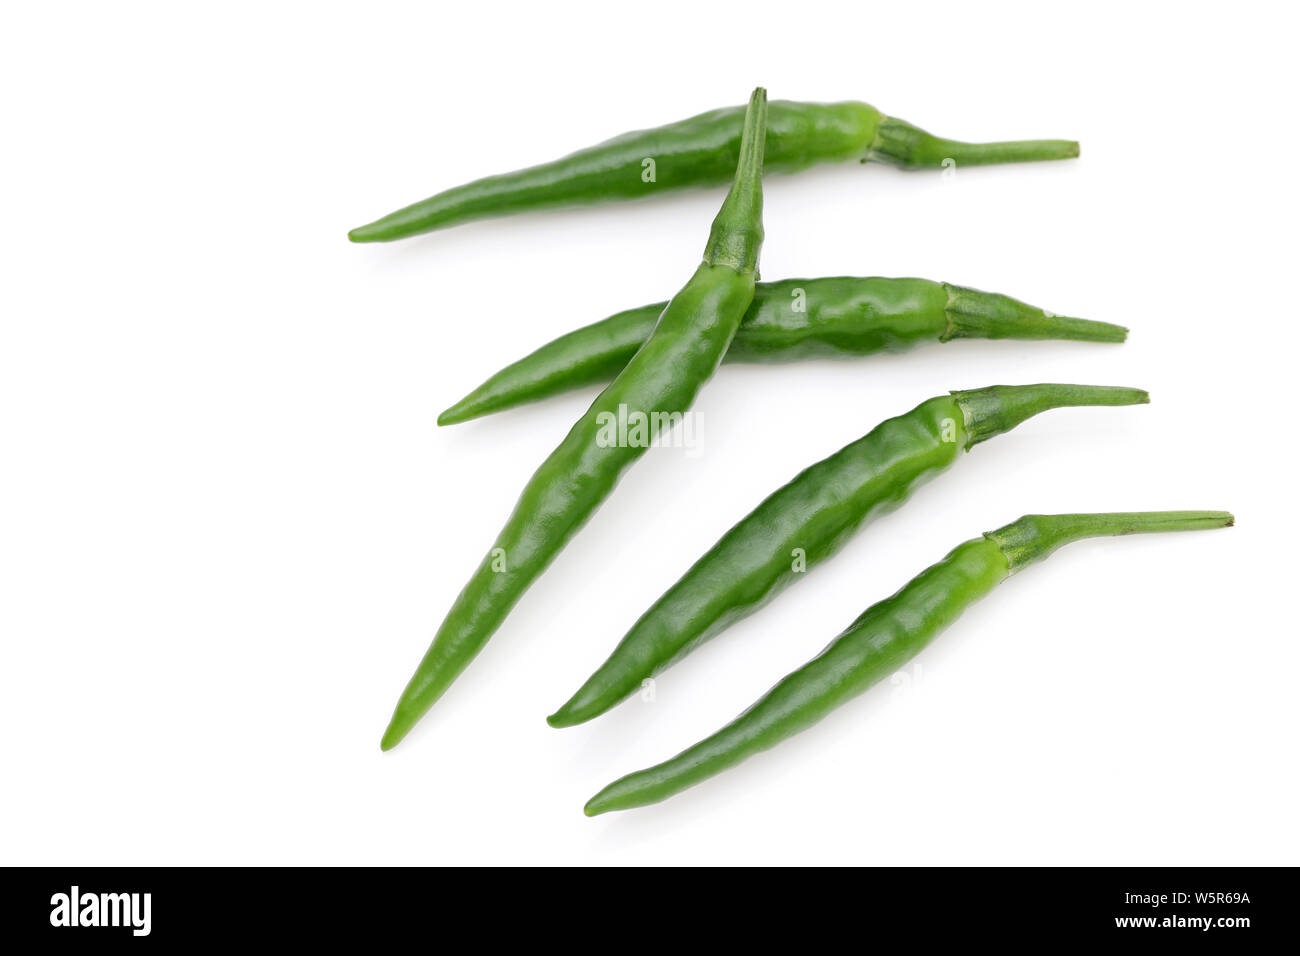 Japanese green chili pepper isolated on white background Stock Photo